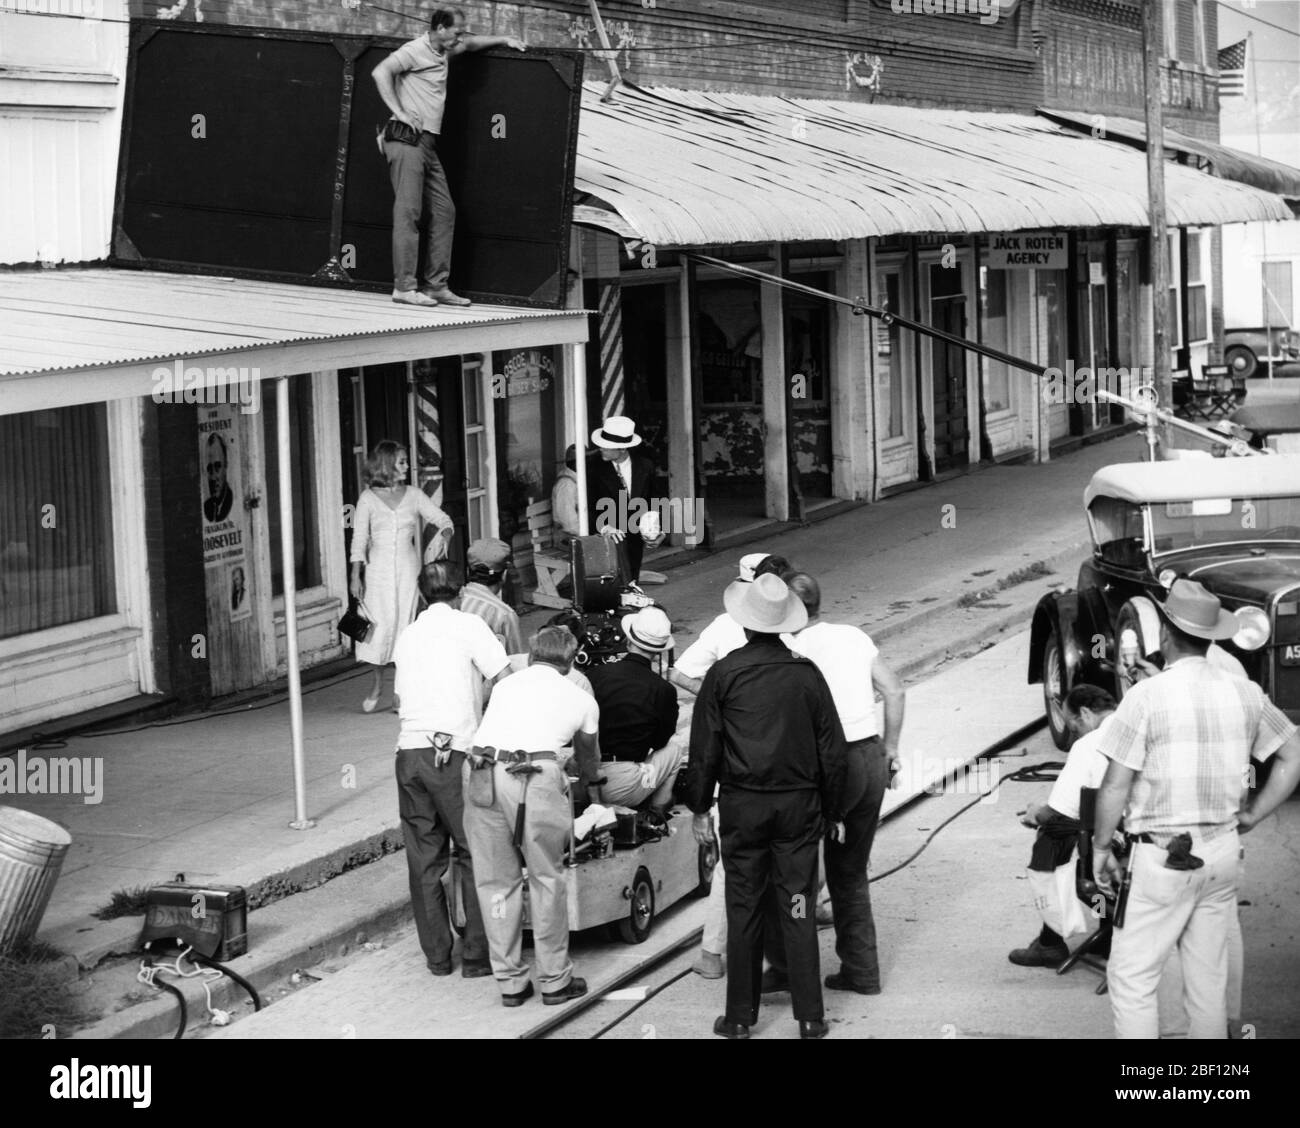 FAYE DUNAWAY as Bonnie Parker and WARREN BEATTY as Clyde Barrow on set location candid with Movie Crew in Venus, Texas filming BONNIE AND CLYDE 1967 director ARTHUR PENN writers David Newman and Robert Benton producer Warren Beatty Tatira - Hiller Productions / Warner Bros.- Seven Arts Stock Photo